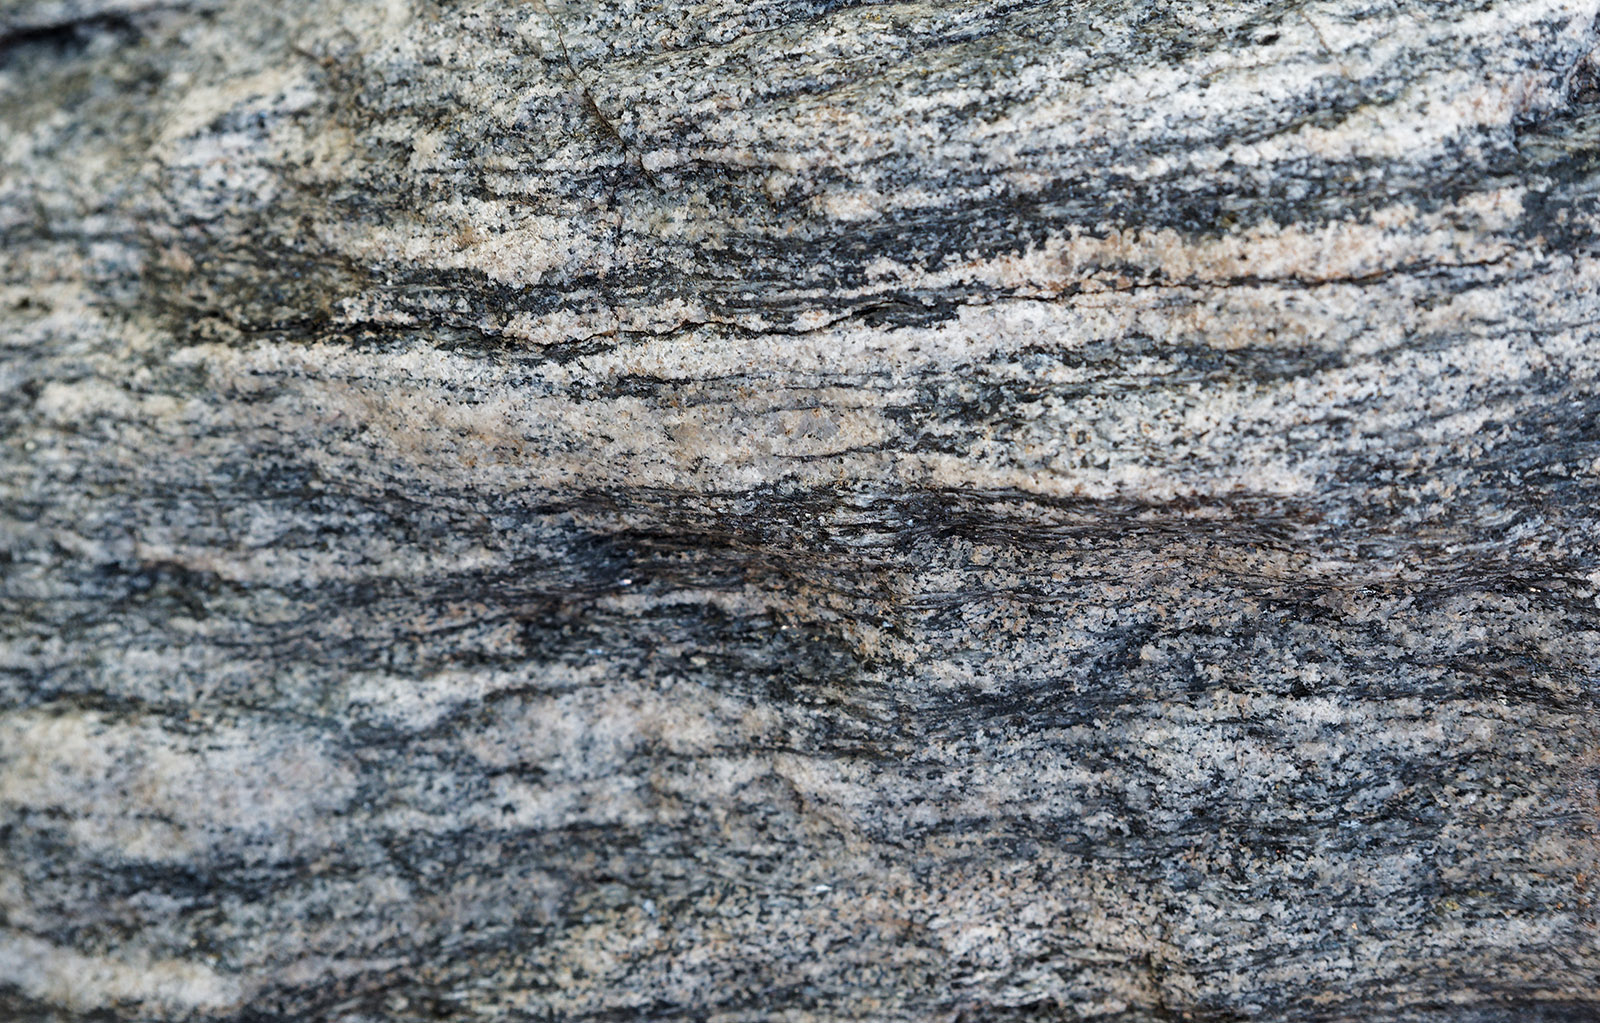 Precambrian gneiss from roadcut on Colorado Highway 82 near Independence Pass.